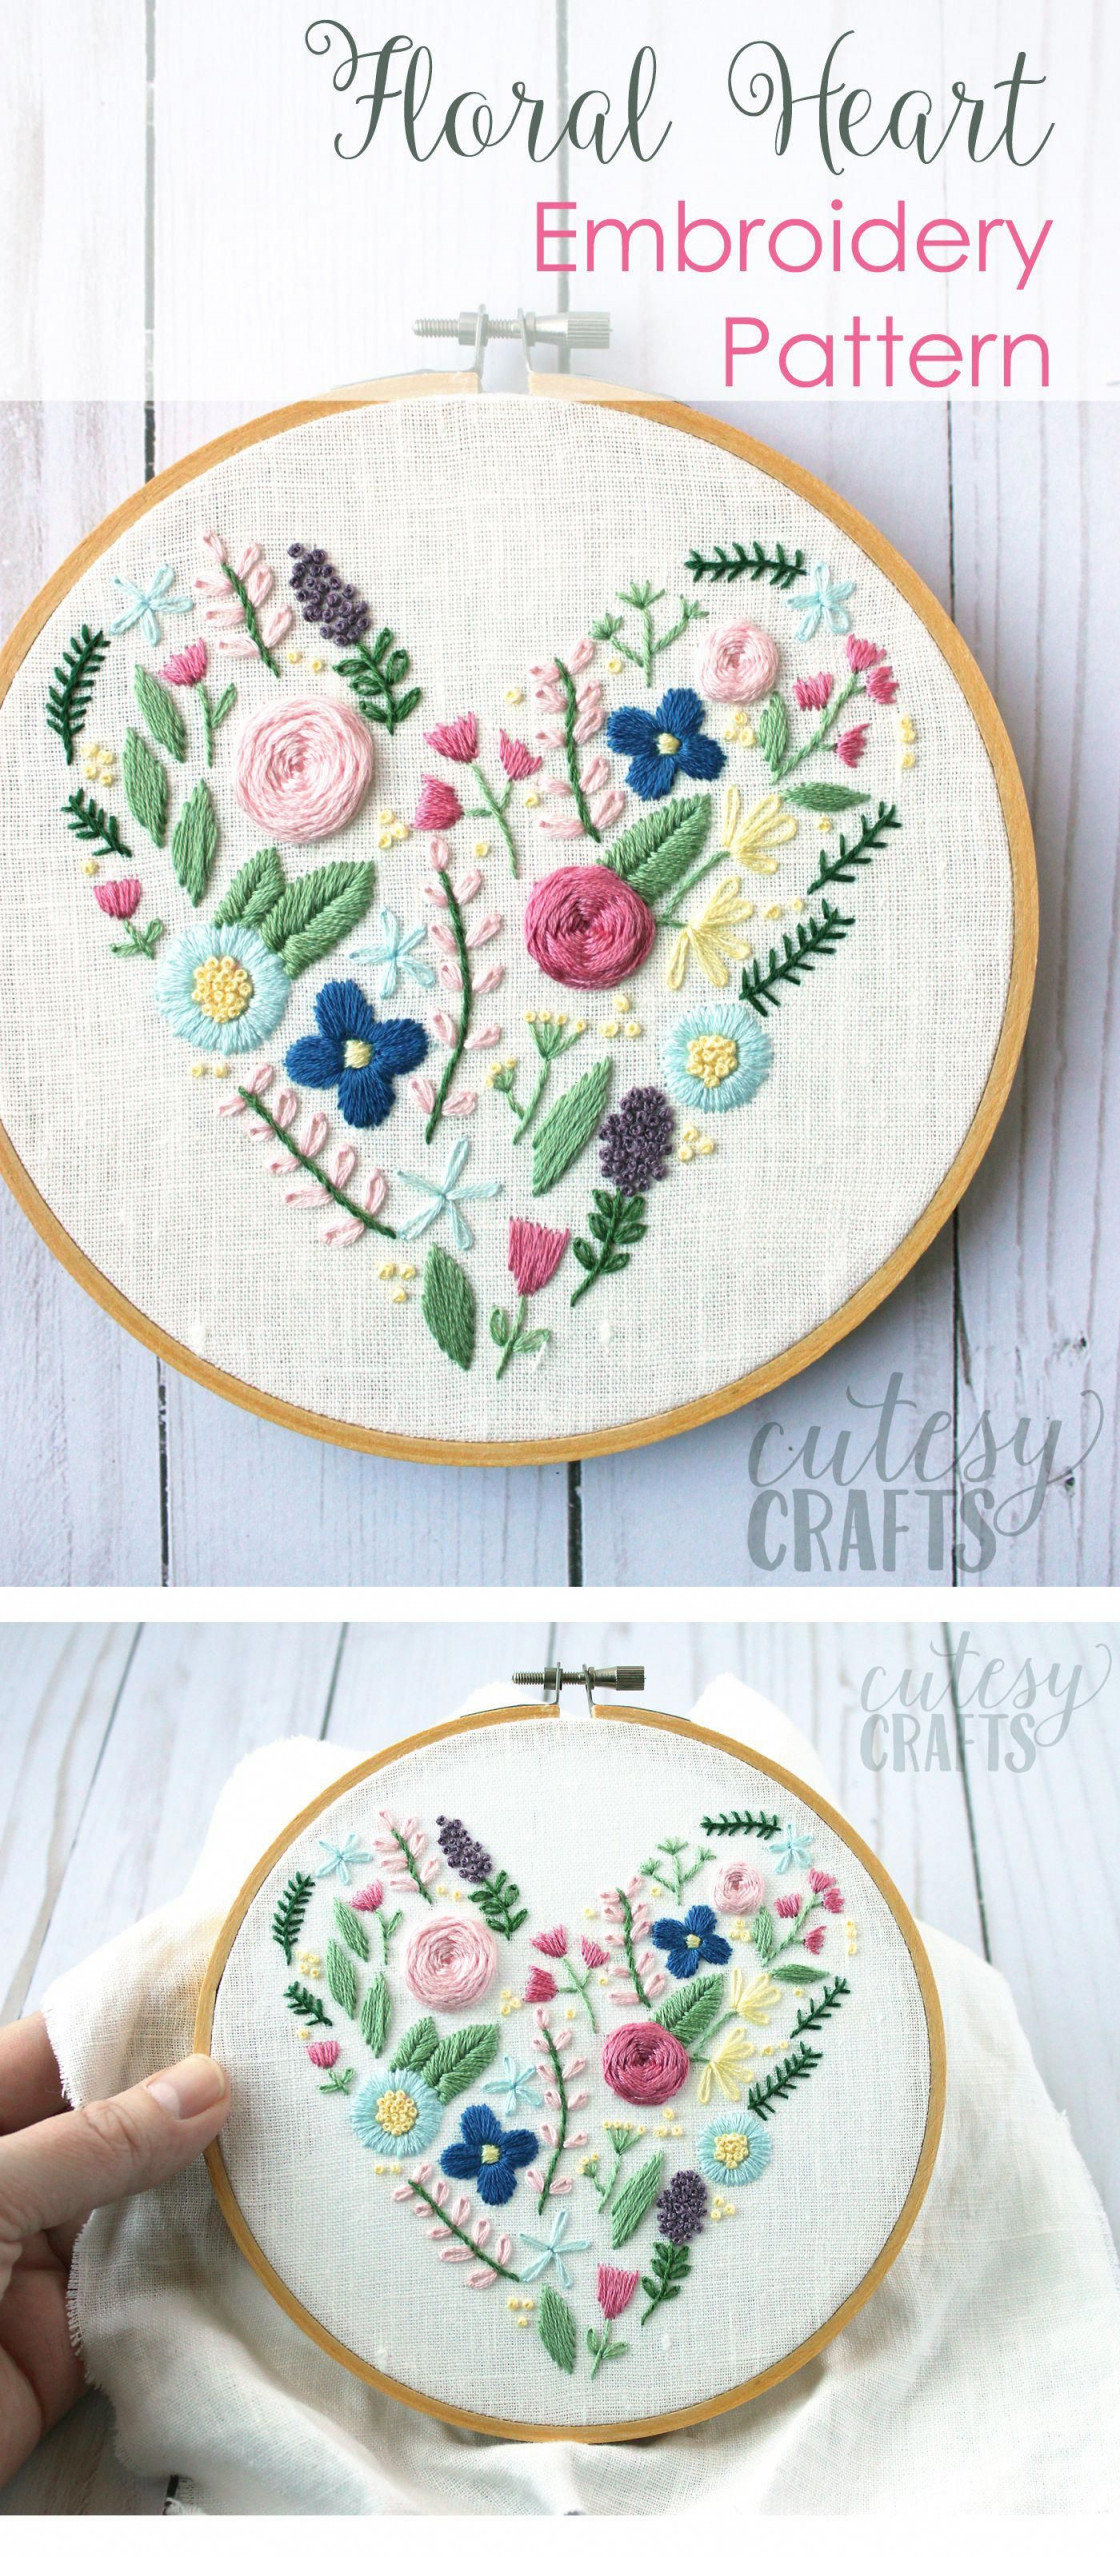 Free Hand Embroidery Patterns Hand Embroidery Patterns For Beginners Unique Learn Hand Embroidery